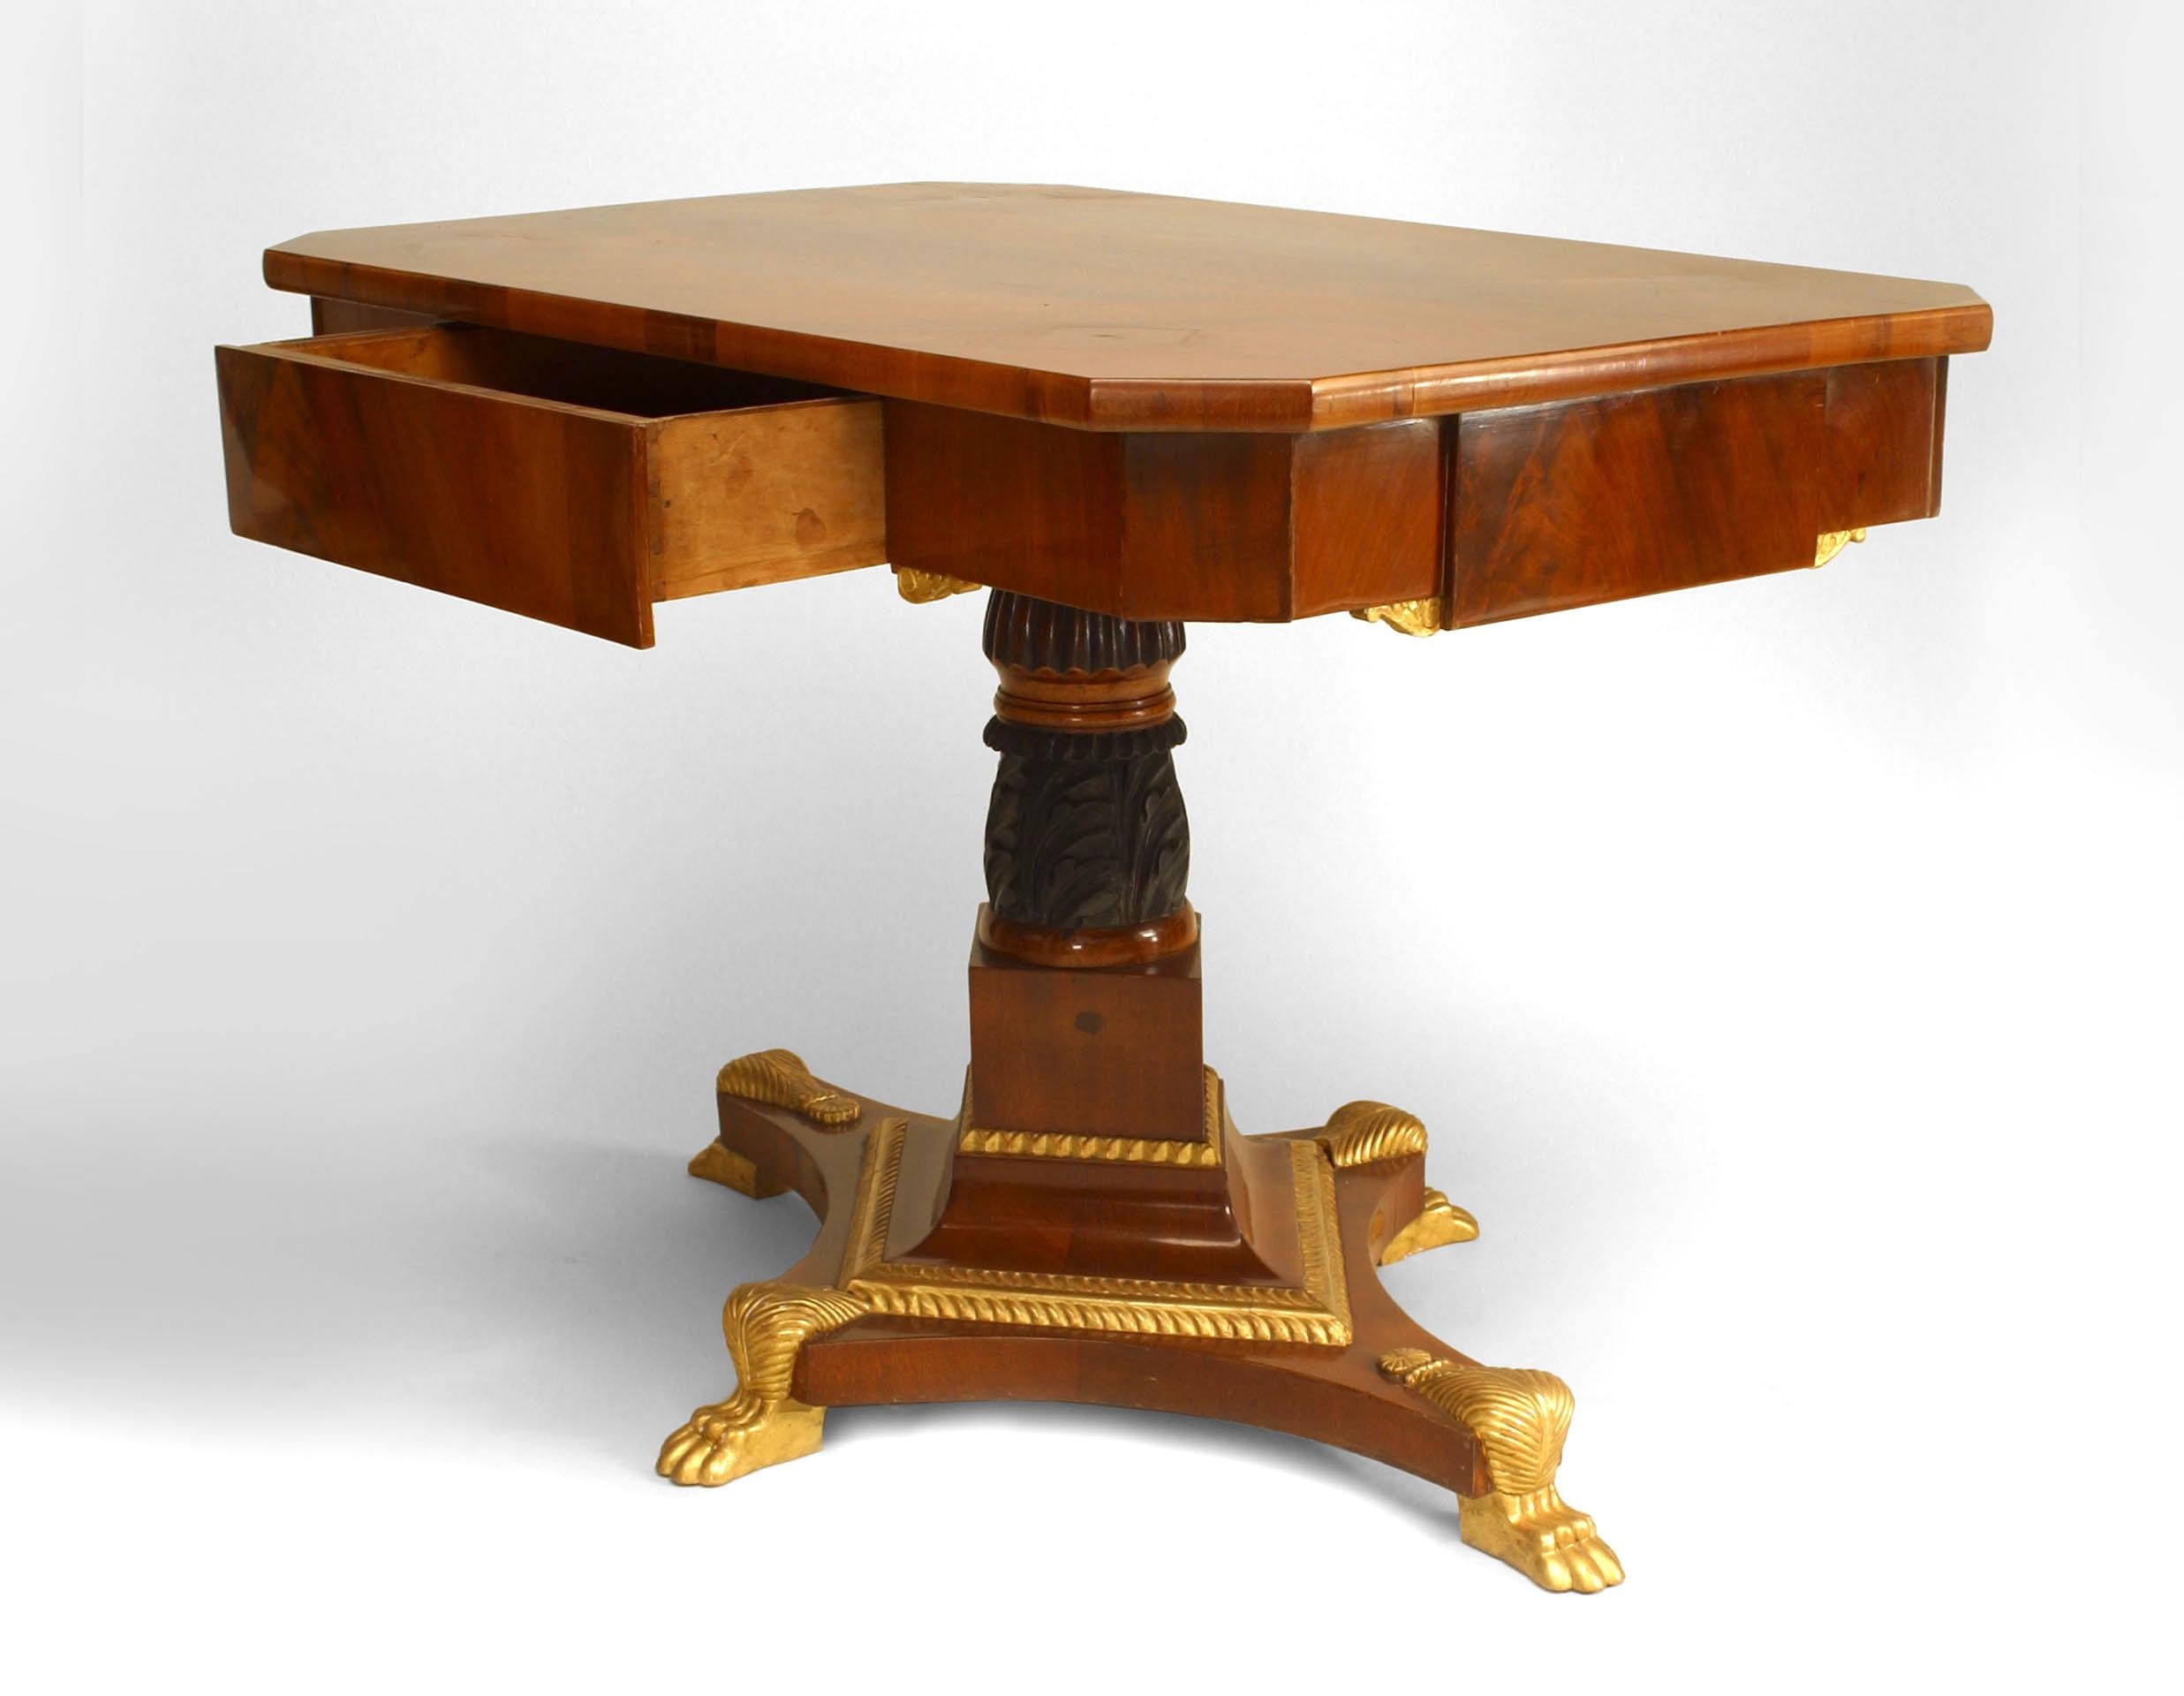 Russian Neoclassic (19th Century) parcel gilt & ebonized mahogany center table with a frieze drawer on an acanthus carved stem and quadripartite base with claw feet.
